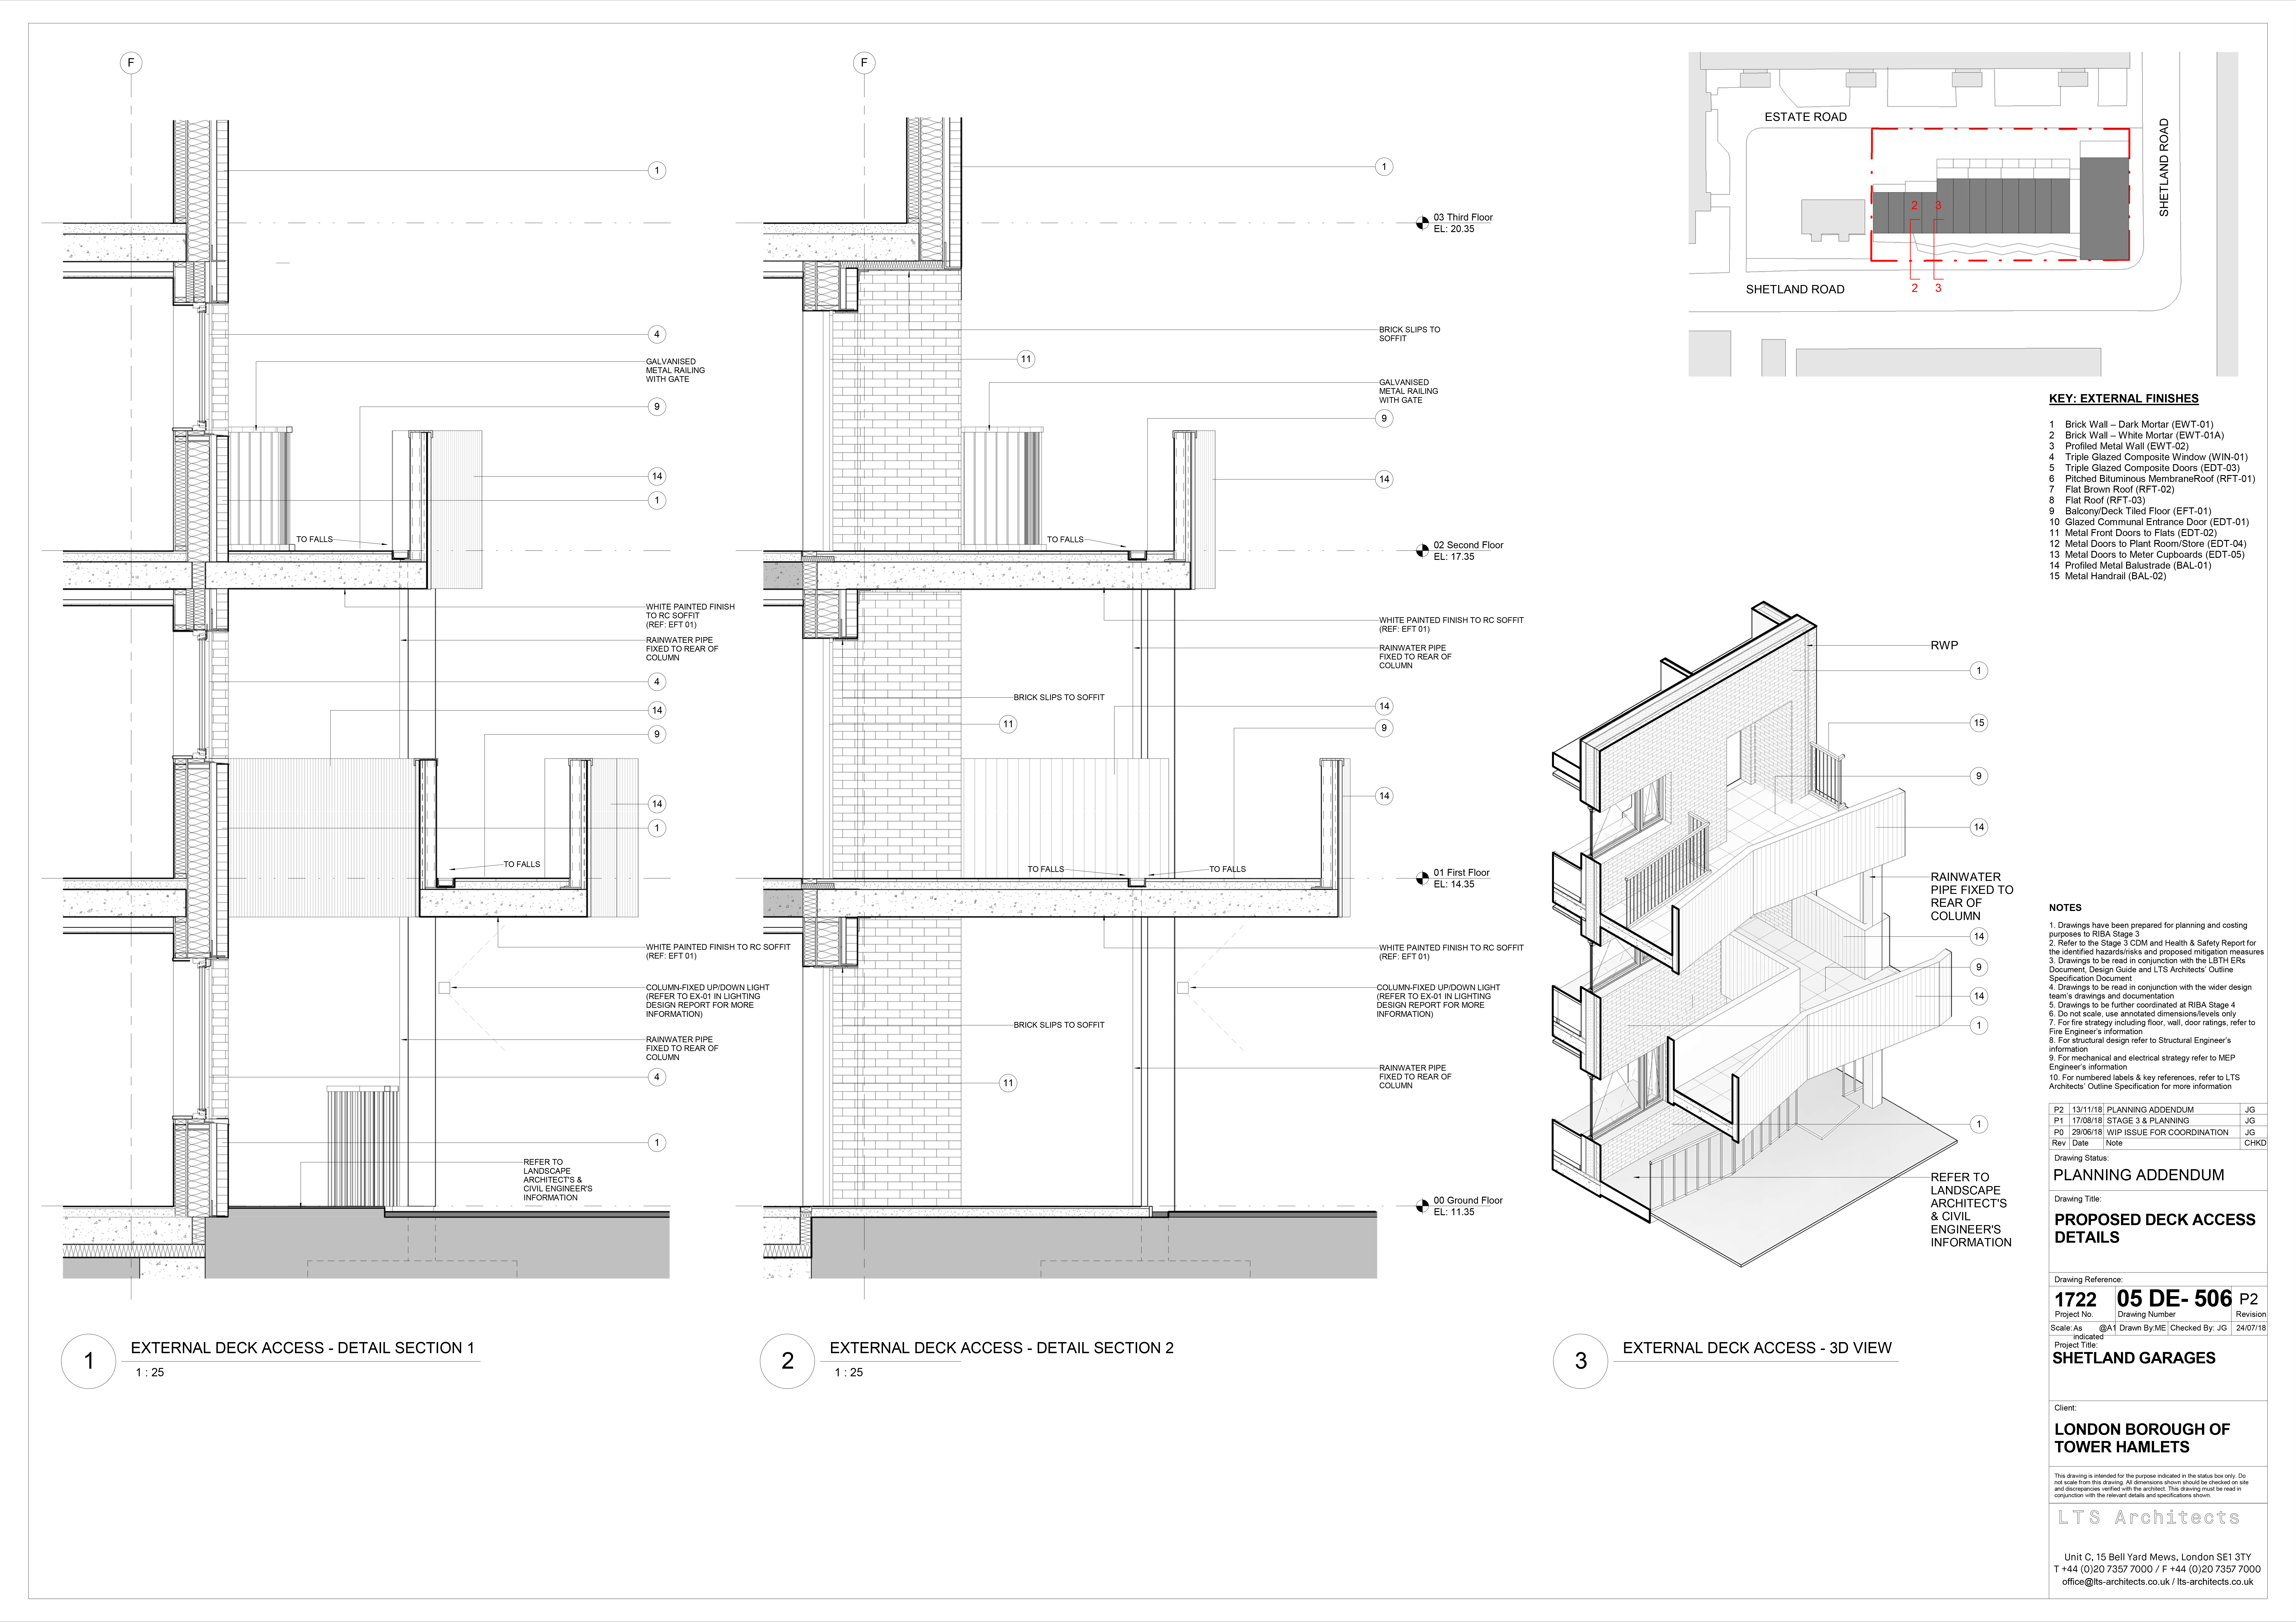 Facade detailing shetland garages tower hamlets lts architects planning permisson granted